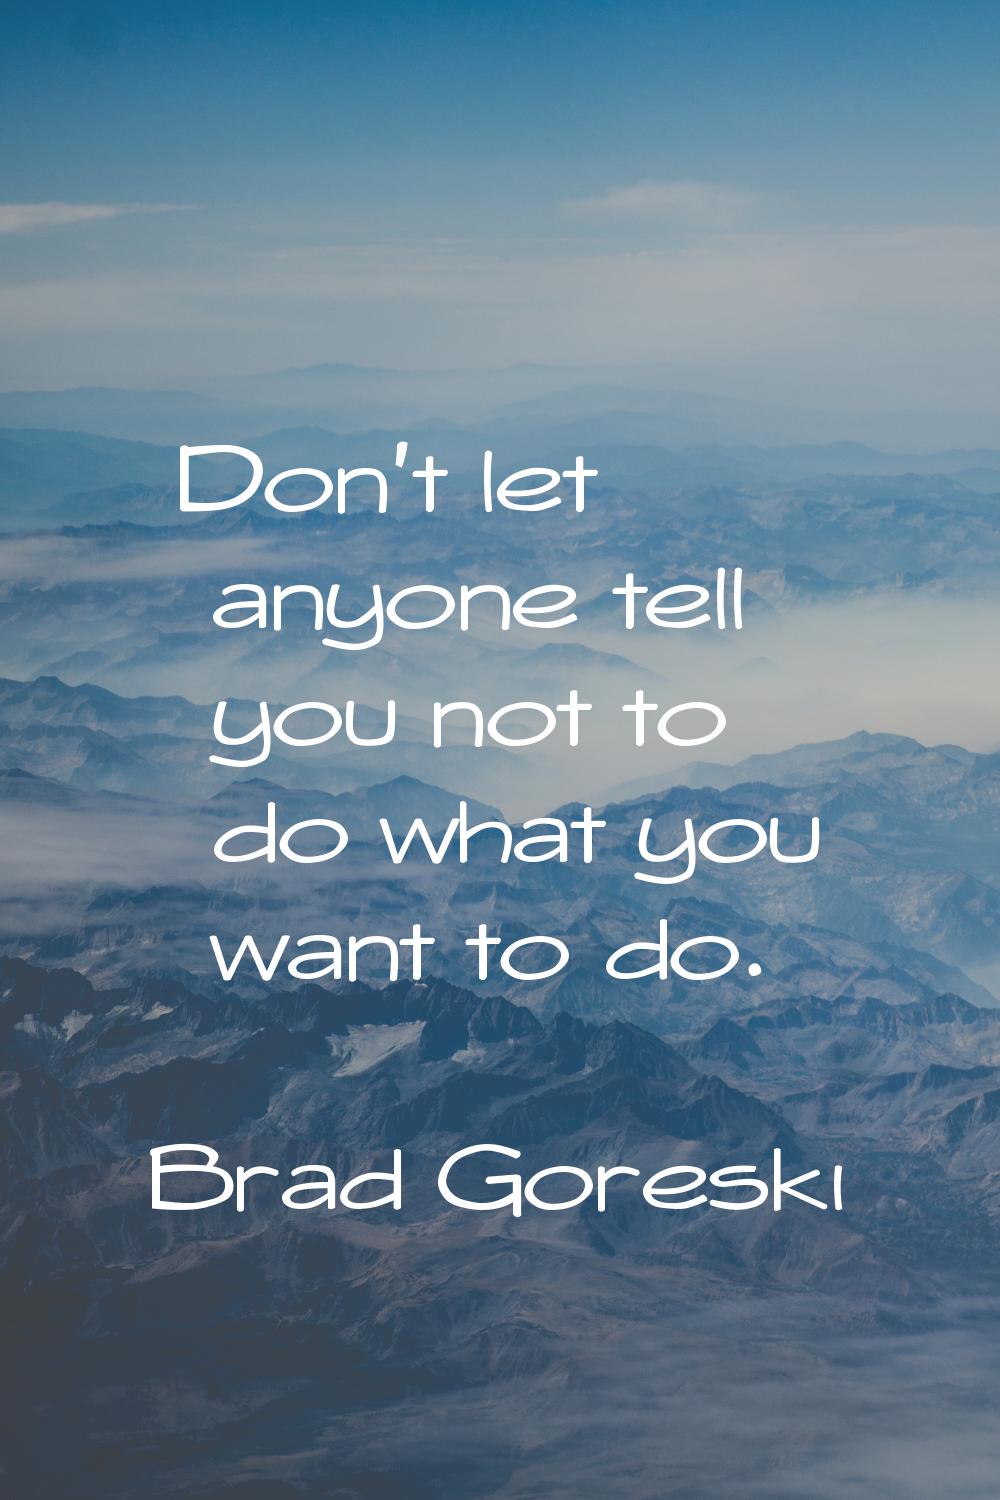 Don't let anyone tell you not to do what you want to do.